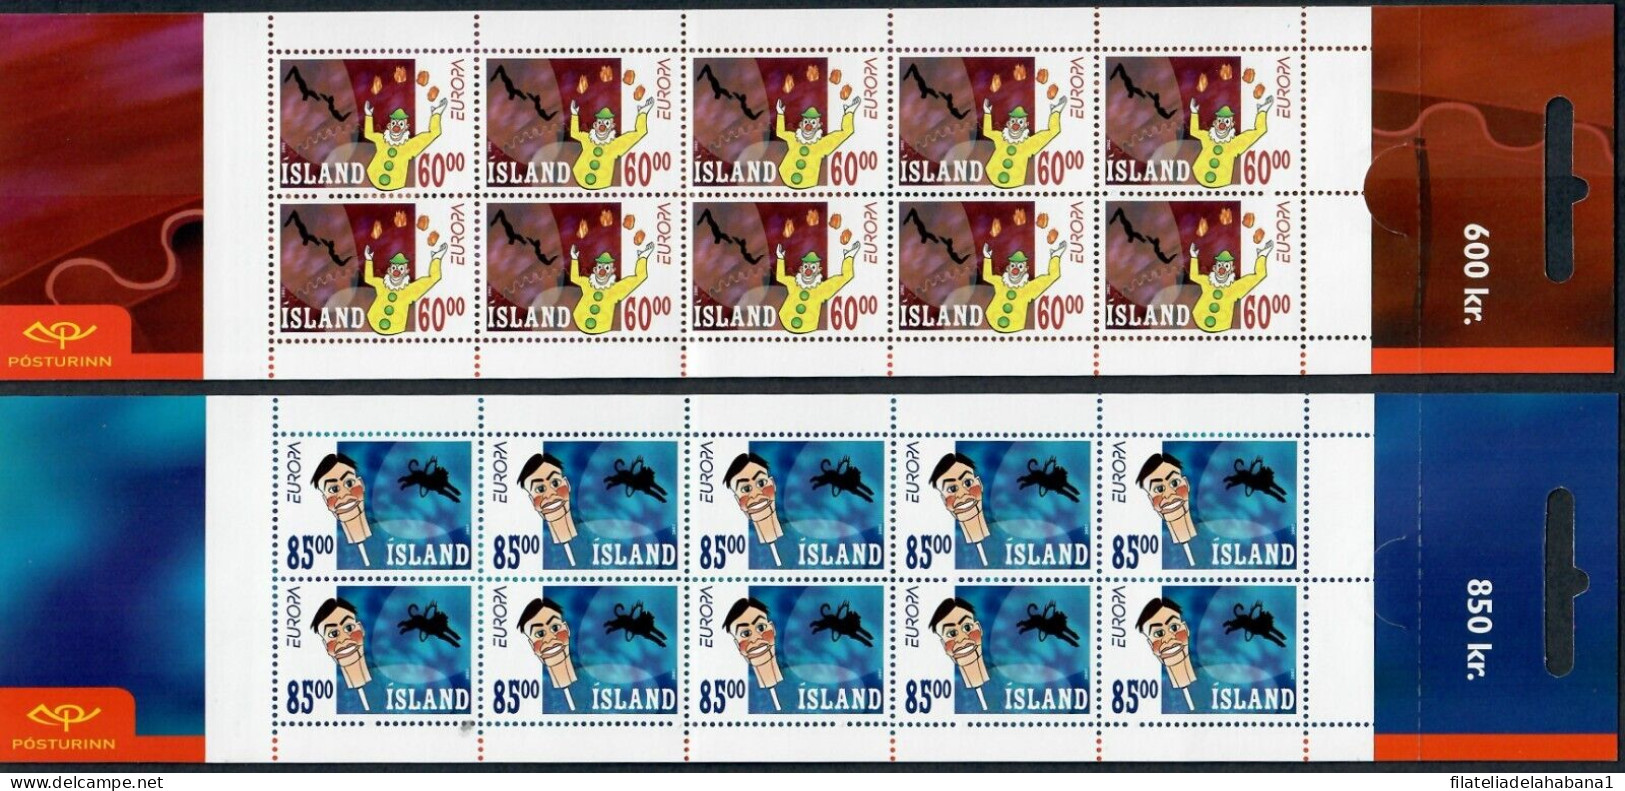 F-EX50055 ICELAND MNH 2002 EUROPA BOOKLED SET CIRCUS.  - Neufs